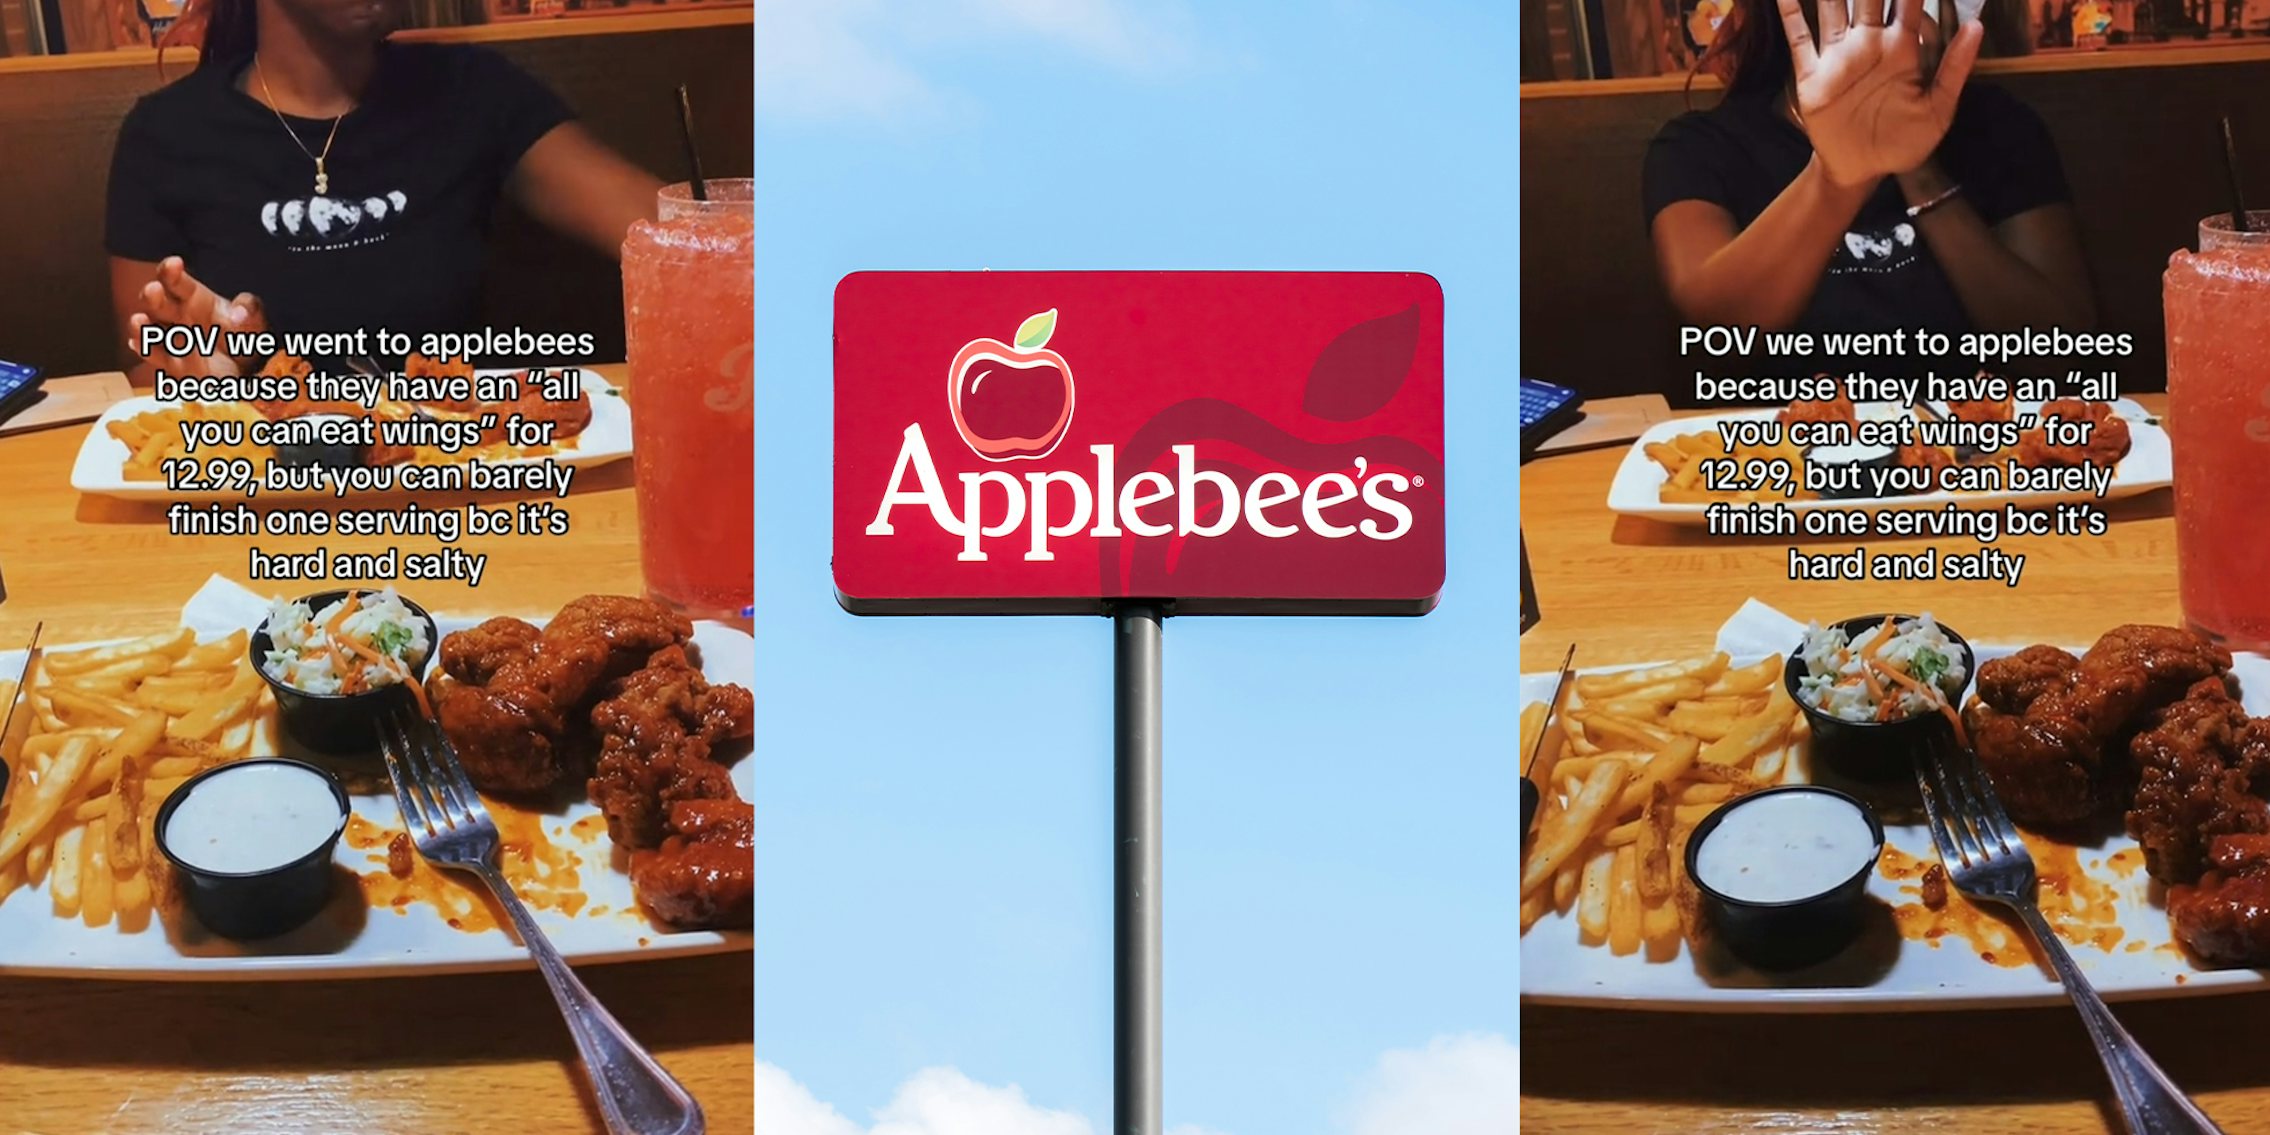 Customers go to Applebee’s for all-you-can-eat wings for $12.99. They only make it through 1 plate